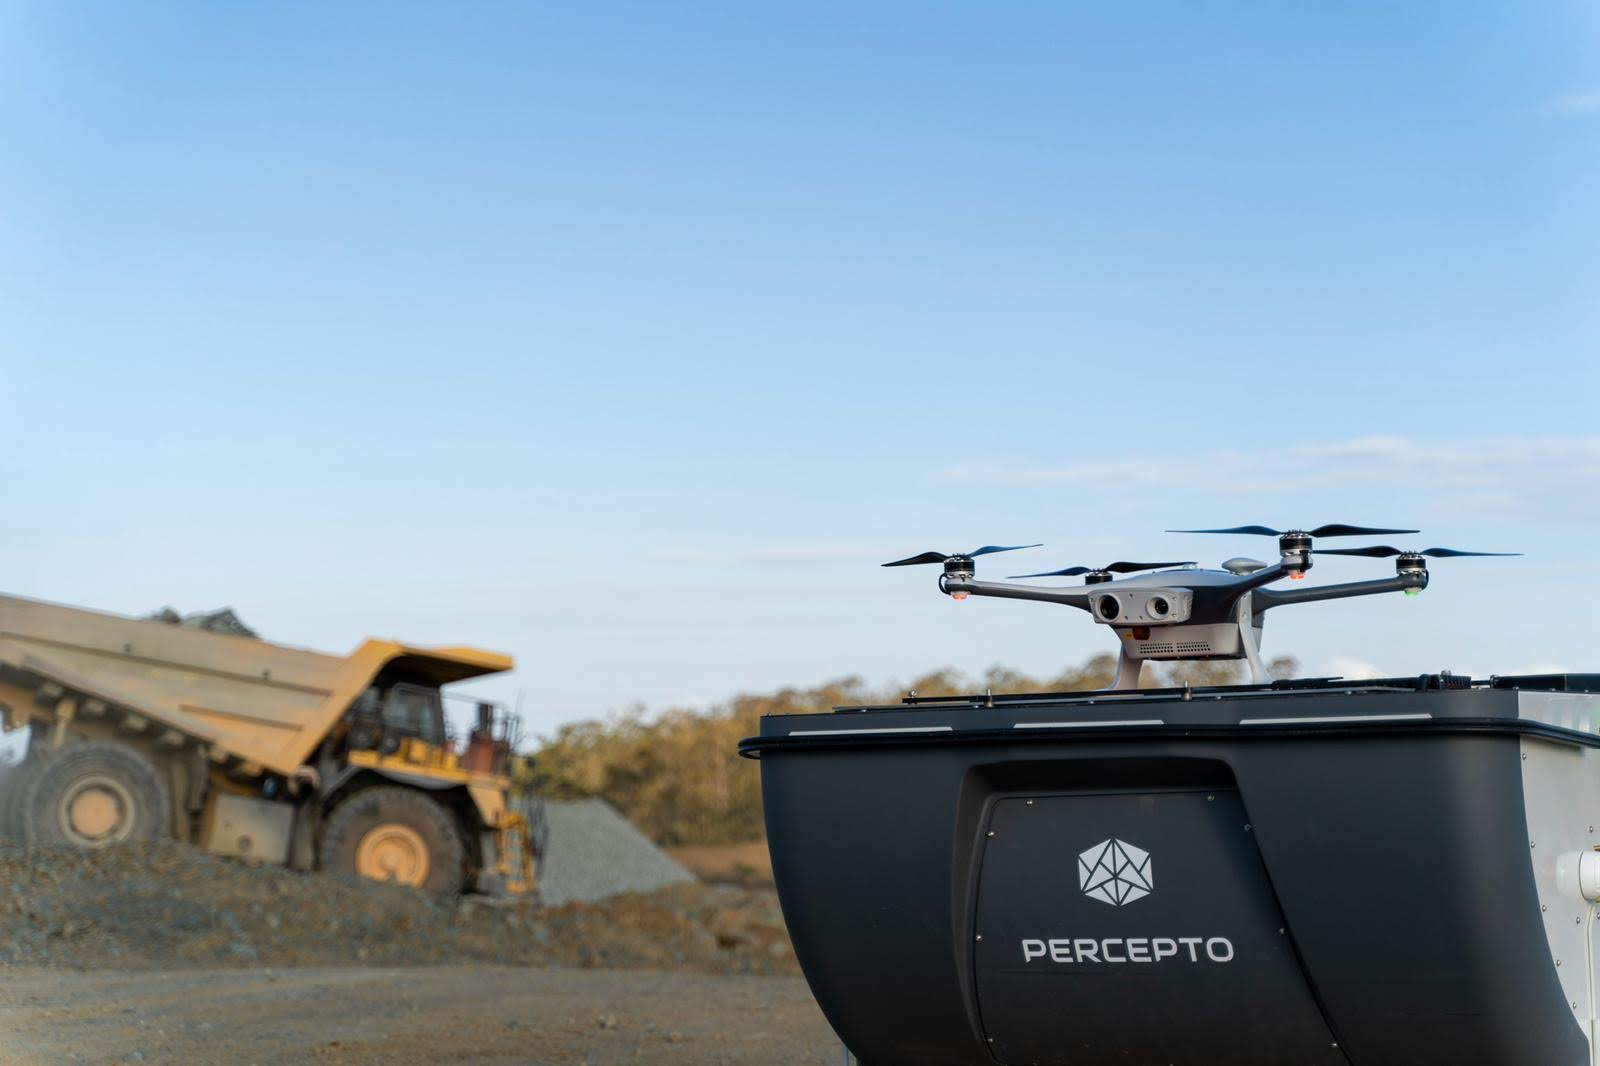 Percepto drone at industrial site